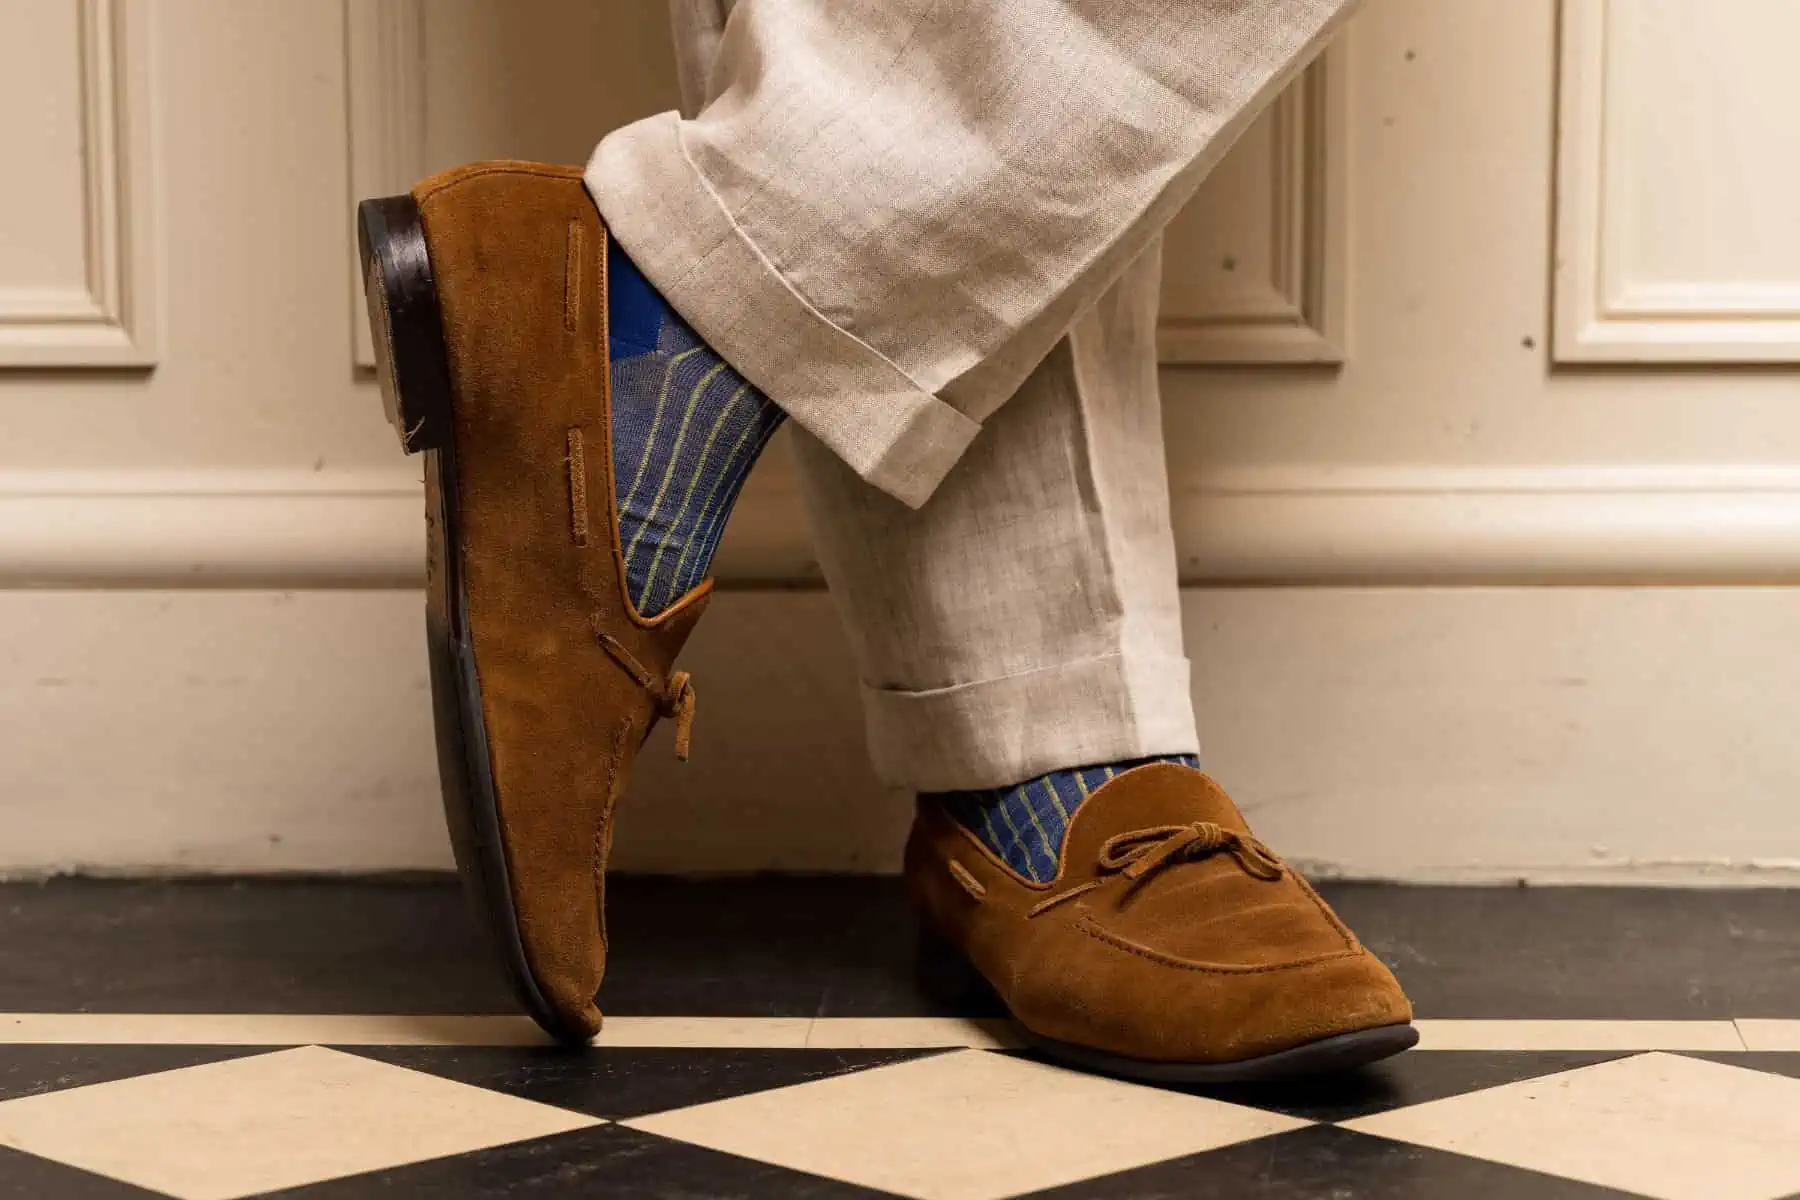 Shadow Stripe Ribbed Bright Blue and Yellow Socks from Fort Belvedere worn with brown suede shoes